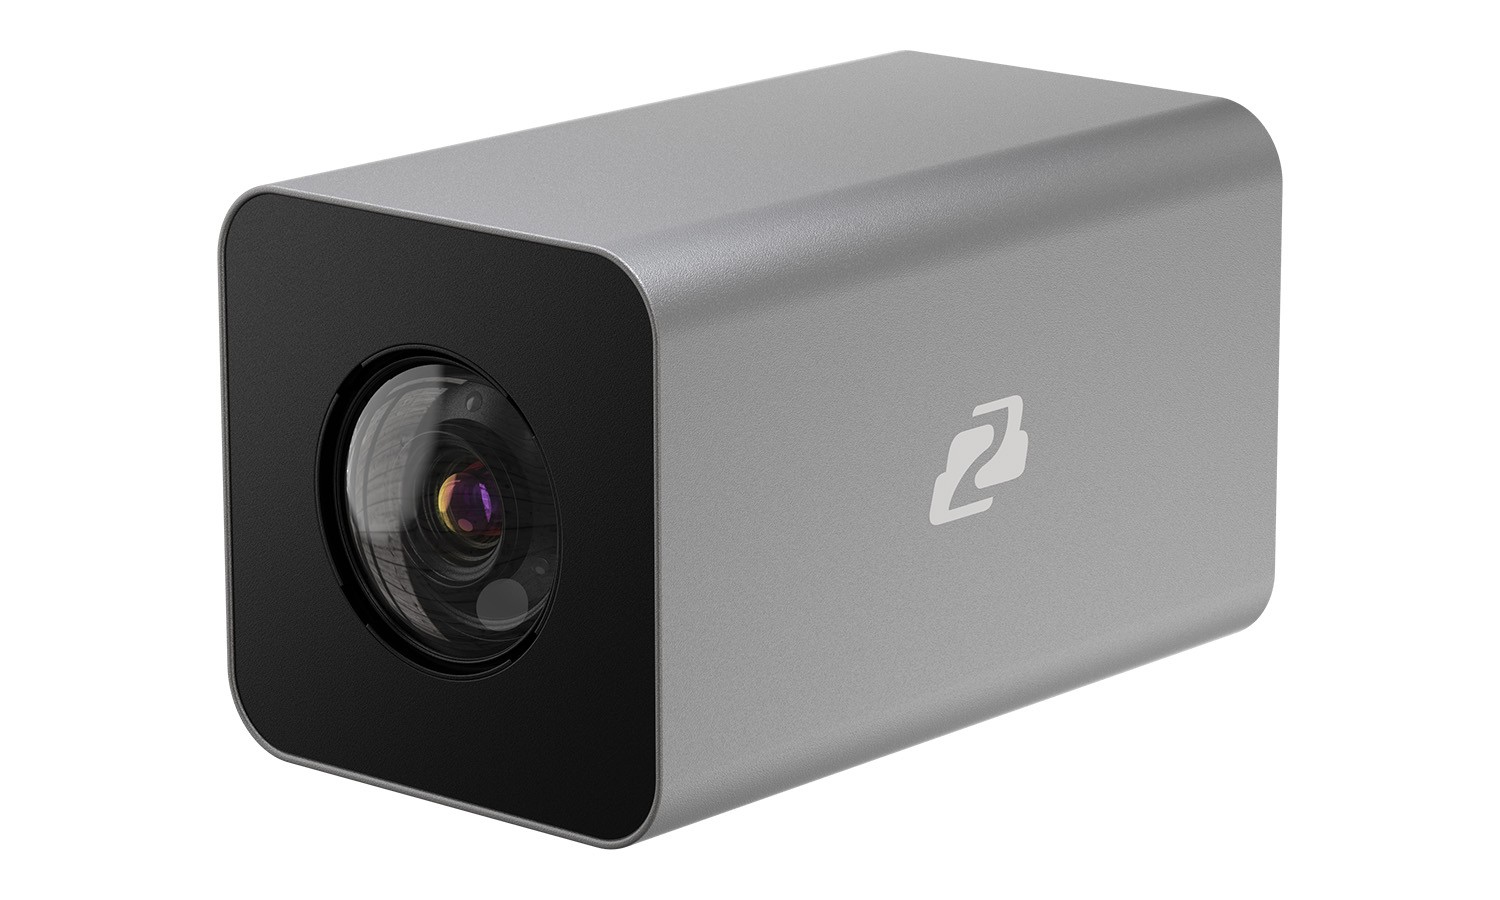 BG-B20SHAN 1080P Full HD 20X Zoom HDMI/SDI/IP/NDI|HX Box Camera with Audio Input by BZBGEAR